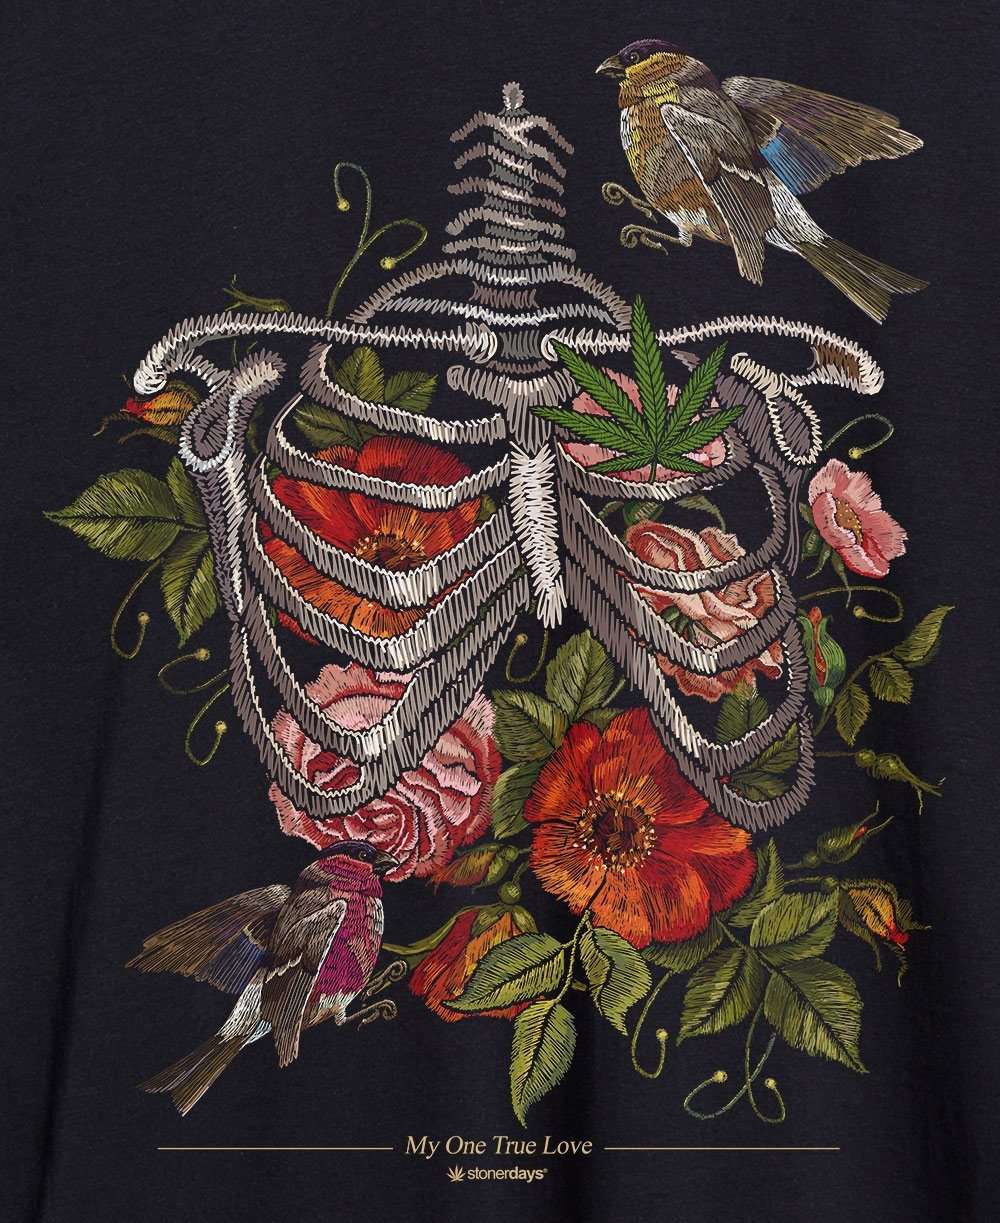 StonerDays Men's True Love Tee in black with detailed ribcage and cannabis leaf design